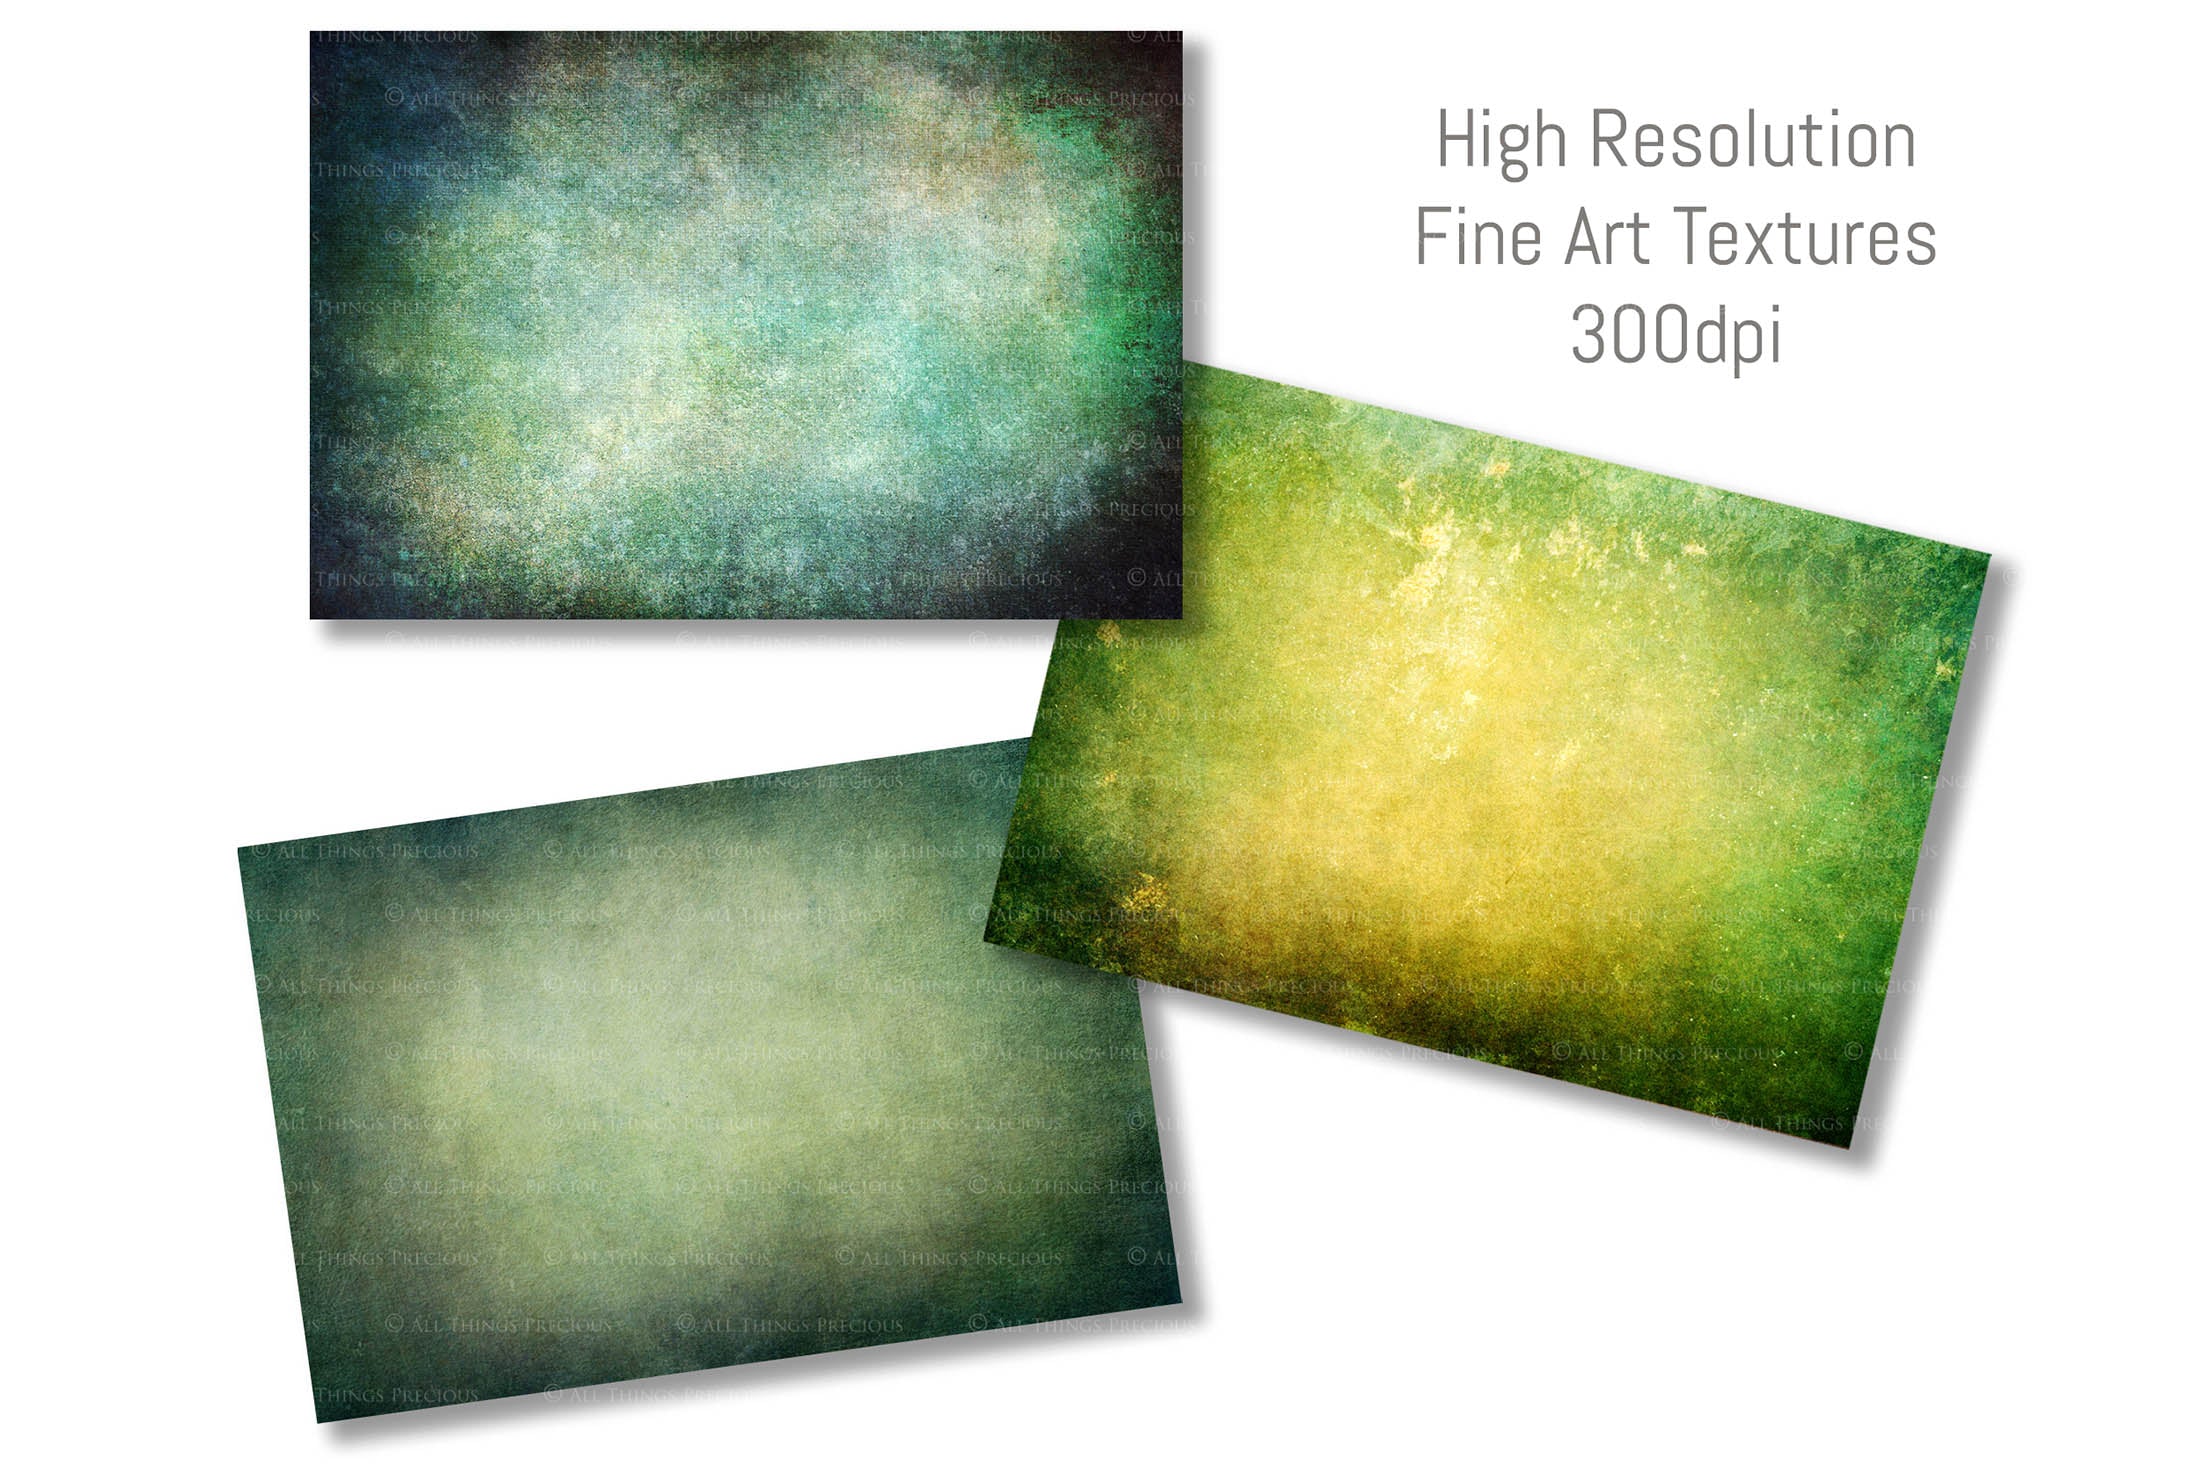 Vibrant Soft Green textures. Fine art textures. Rich, Nature colour tints. Texture for photographers and digital editing. Photo Overlays. Antique, Vintage, Grunge, Light, Dark Bundle. Textured printable Canvas, Colour, Monochrome, Bundle. High resolution, 300dpi Graphic Assets for photography, digital scrapbooking and design. By ATP Textures